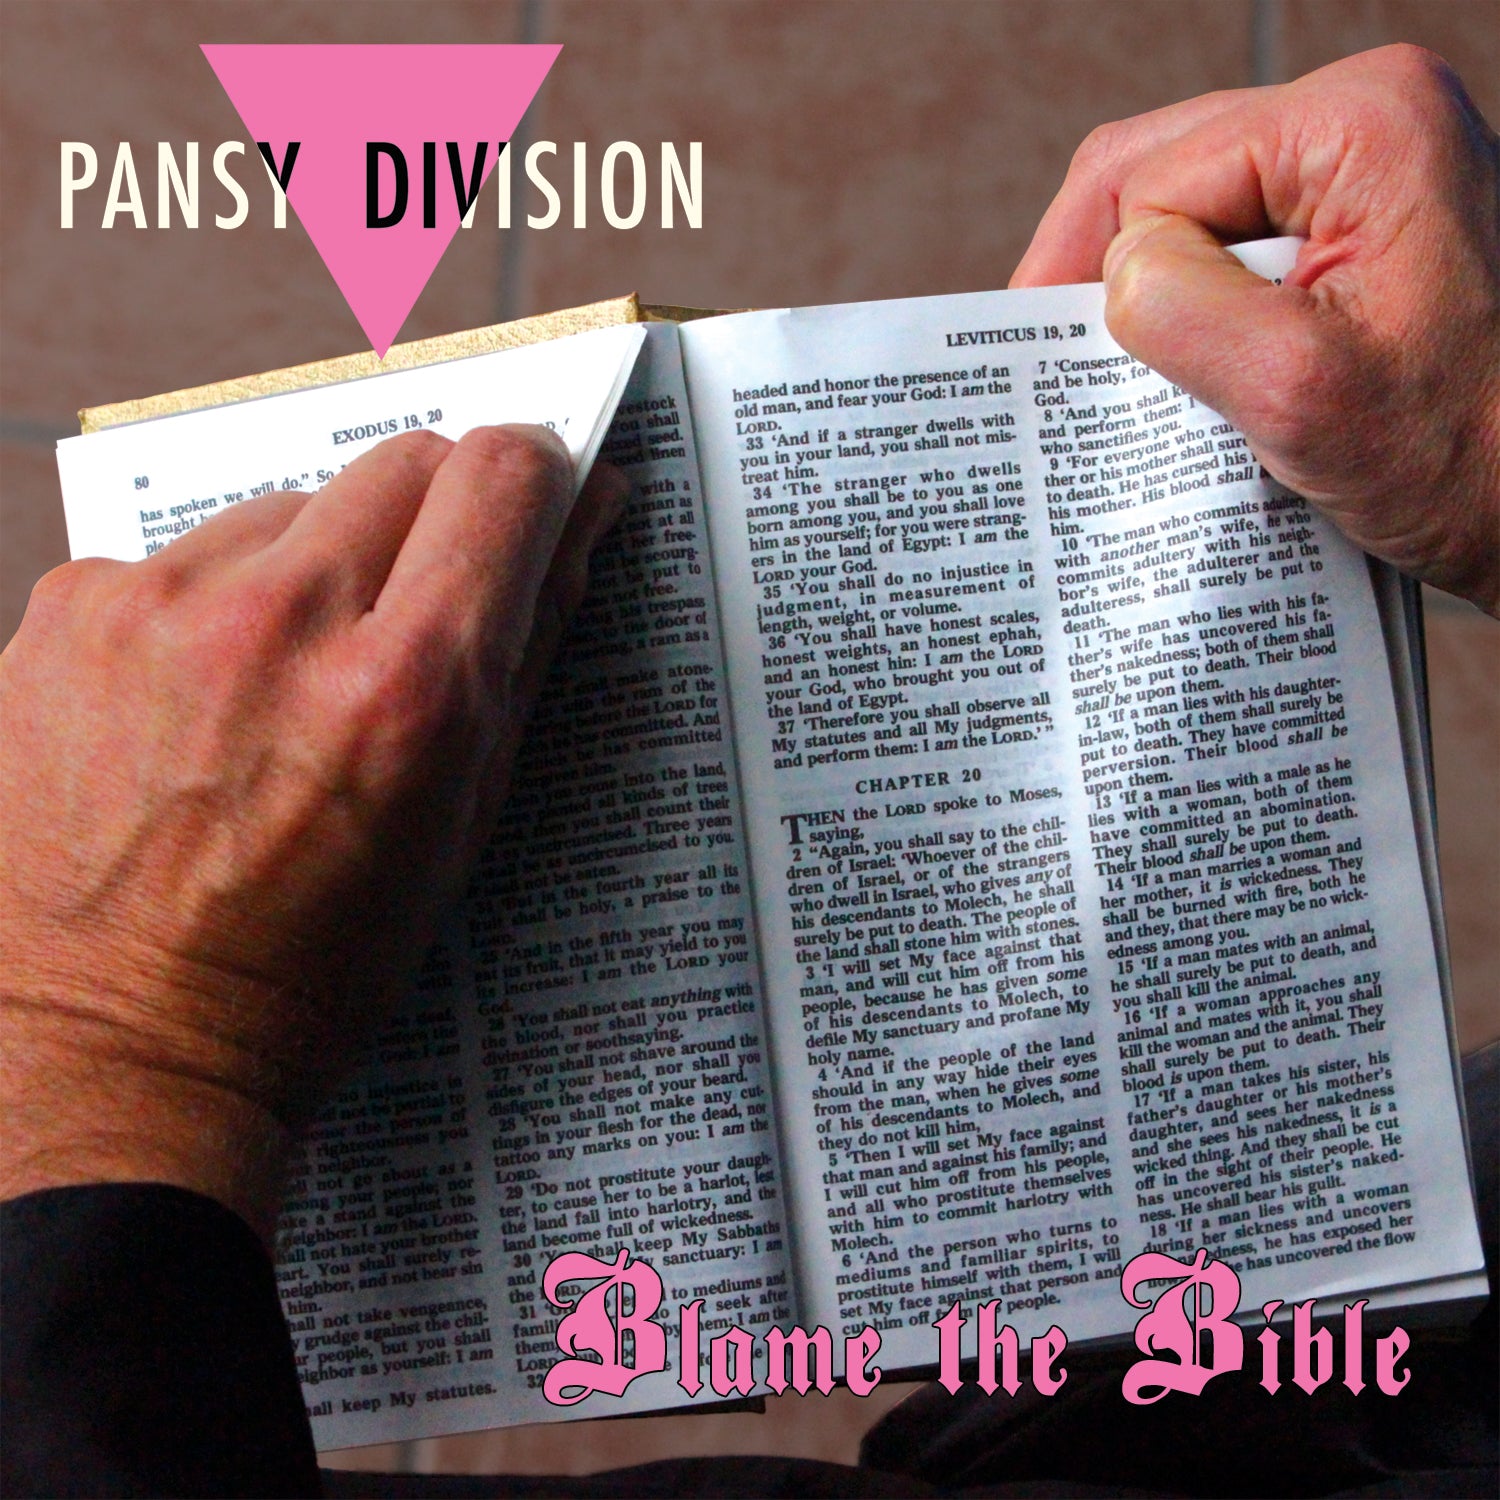 7" CLUB DECEMBER 2020: PANSY DIVISION "BLAME THE BIBLE"